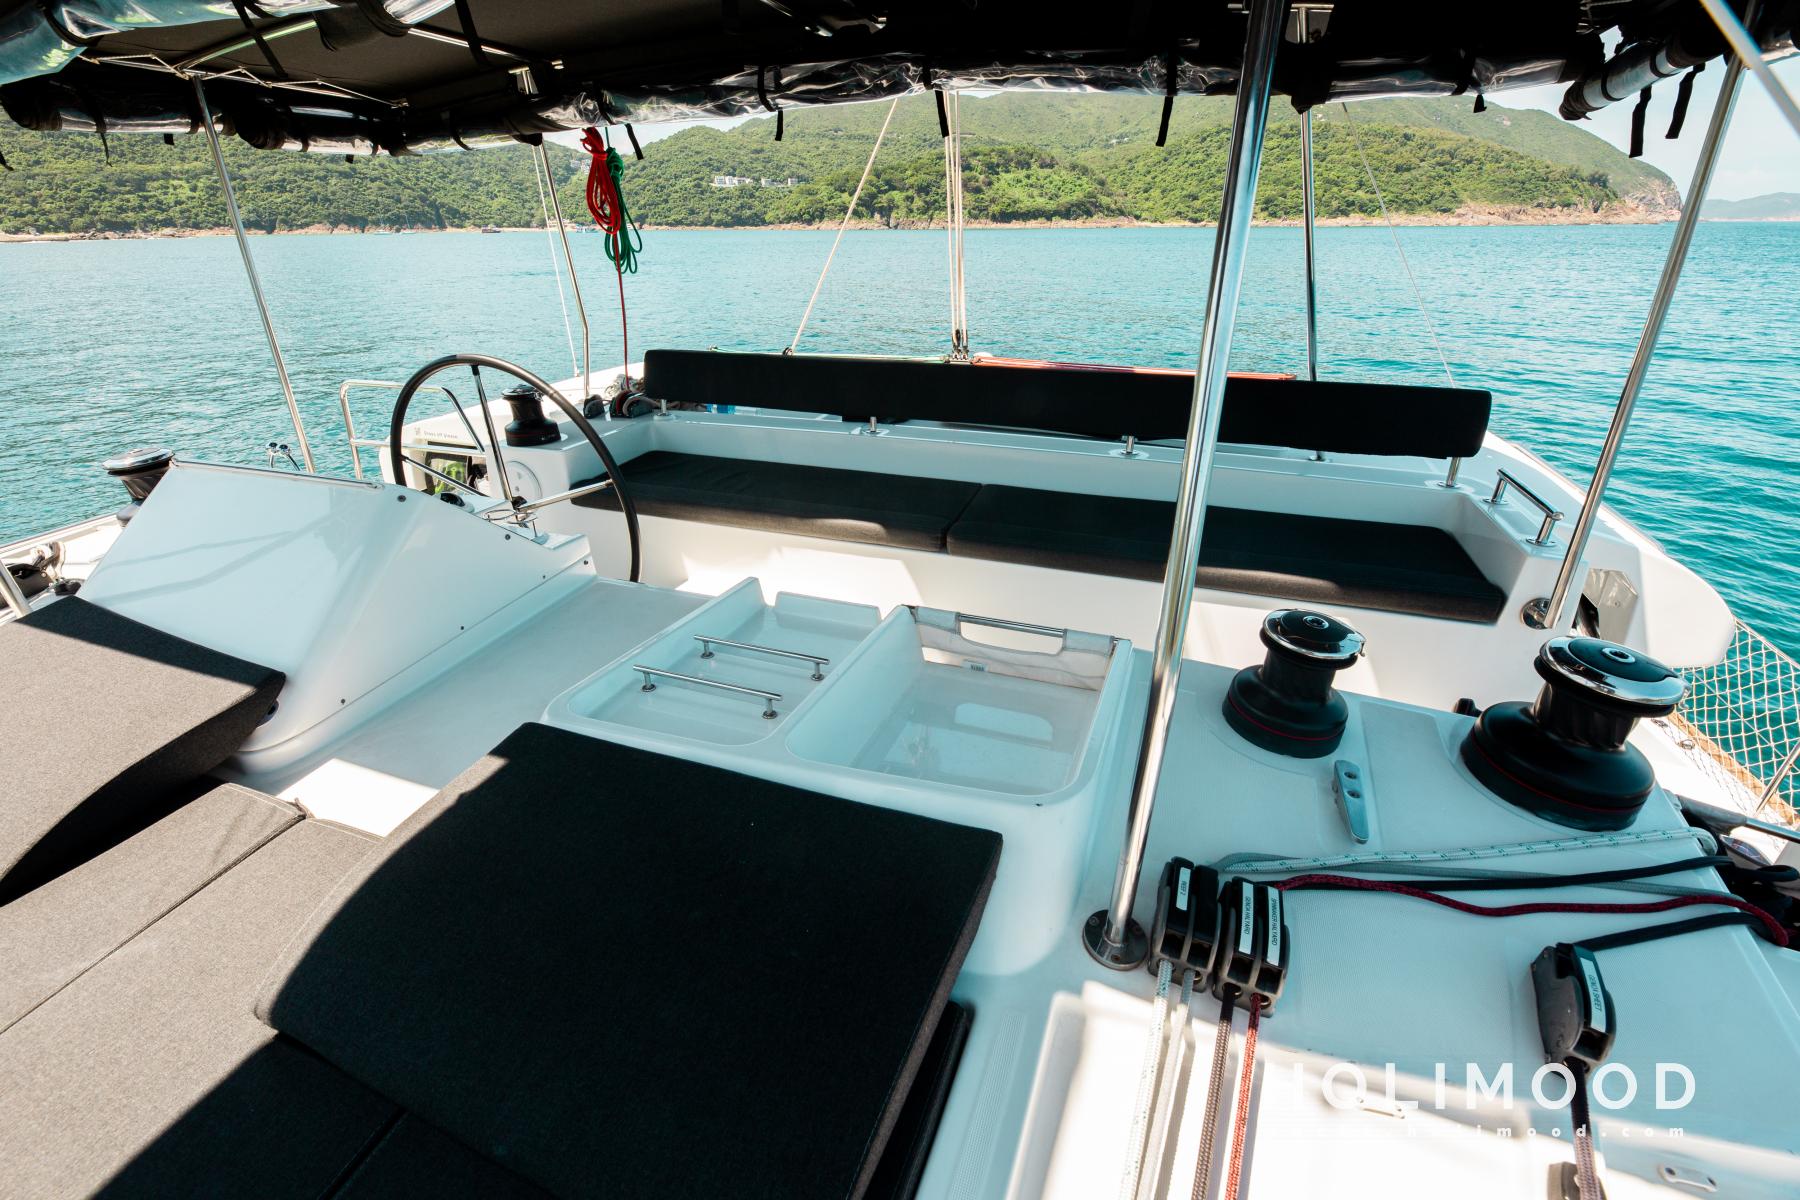 SL01 Catamaran Party Package (Free BBQ Lunch + Swimming Pool + Sailing Exp) 20